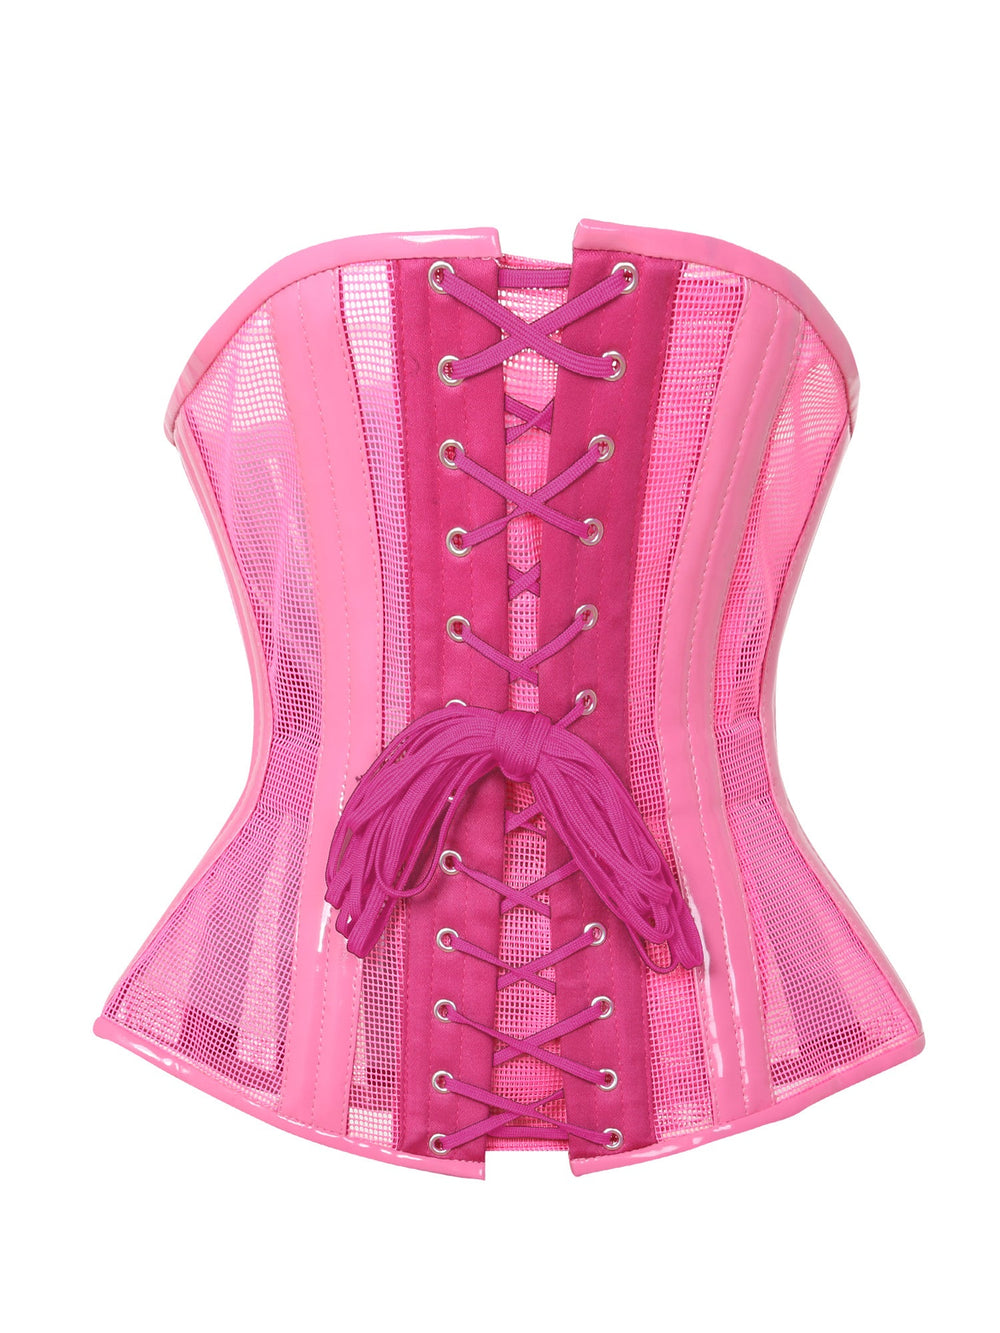 Pink Underbust Corset With Feature Mesh - Honour Clothing